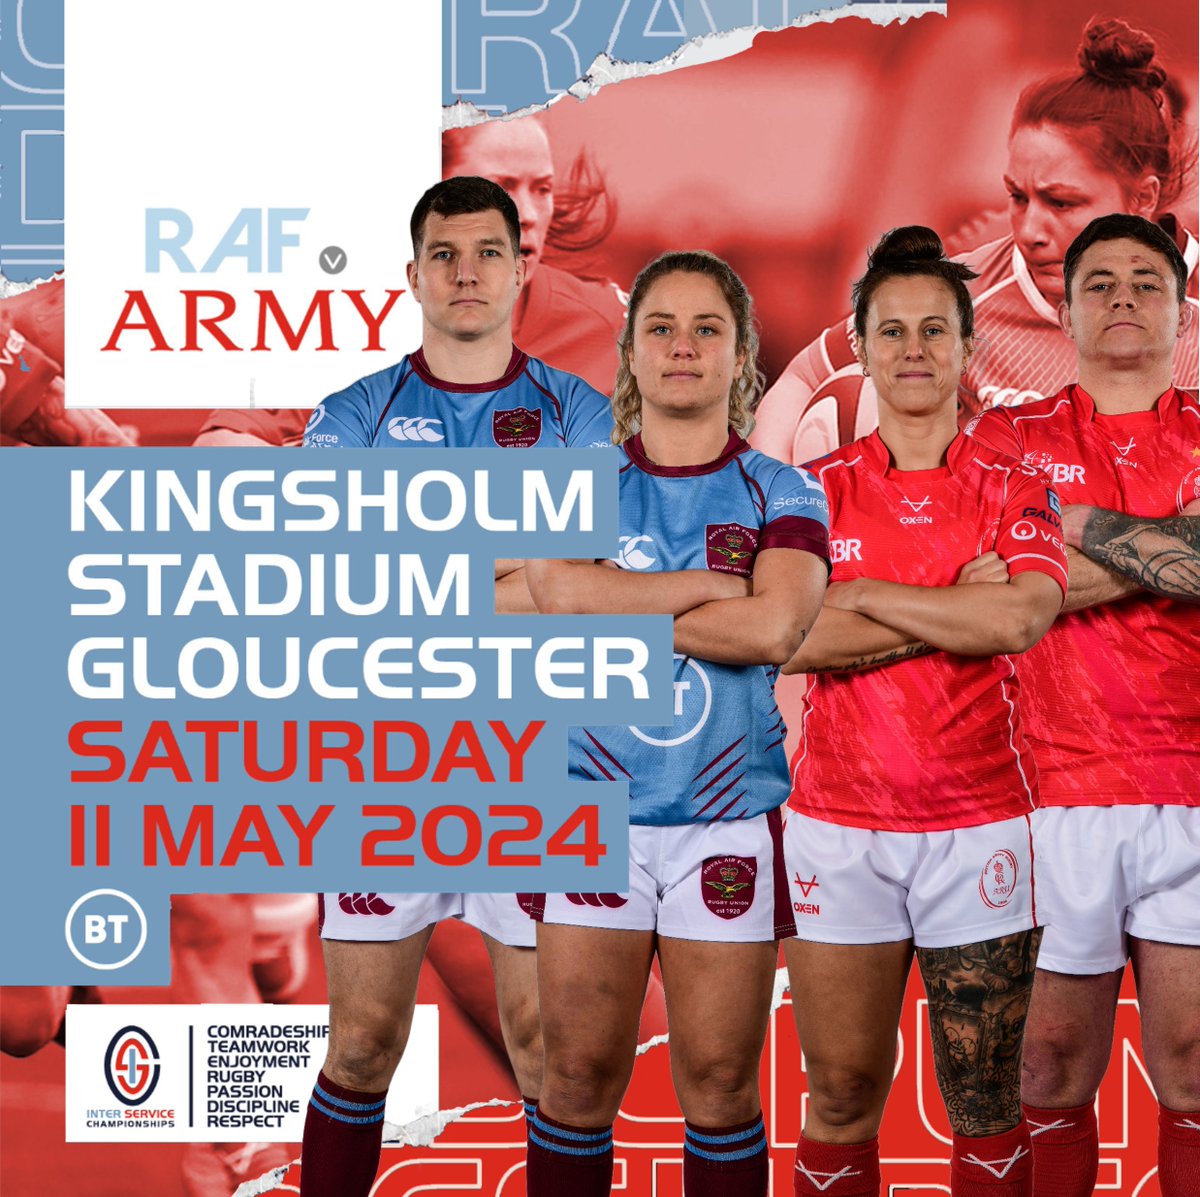 Fancy winning 4 tickets to the RAF V Army 2024 Rugby match on Saturday 11 May 2024 at Kingsholm Stadium? If so, all you need to do is complete this form on our website before 1pm on 6 May: ow.ly/SVuU50RjEnL The winner will be selected randomly! Good Luck!